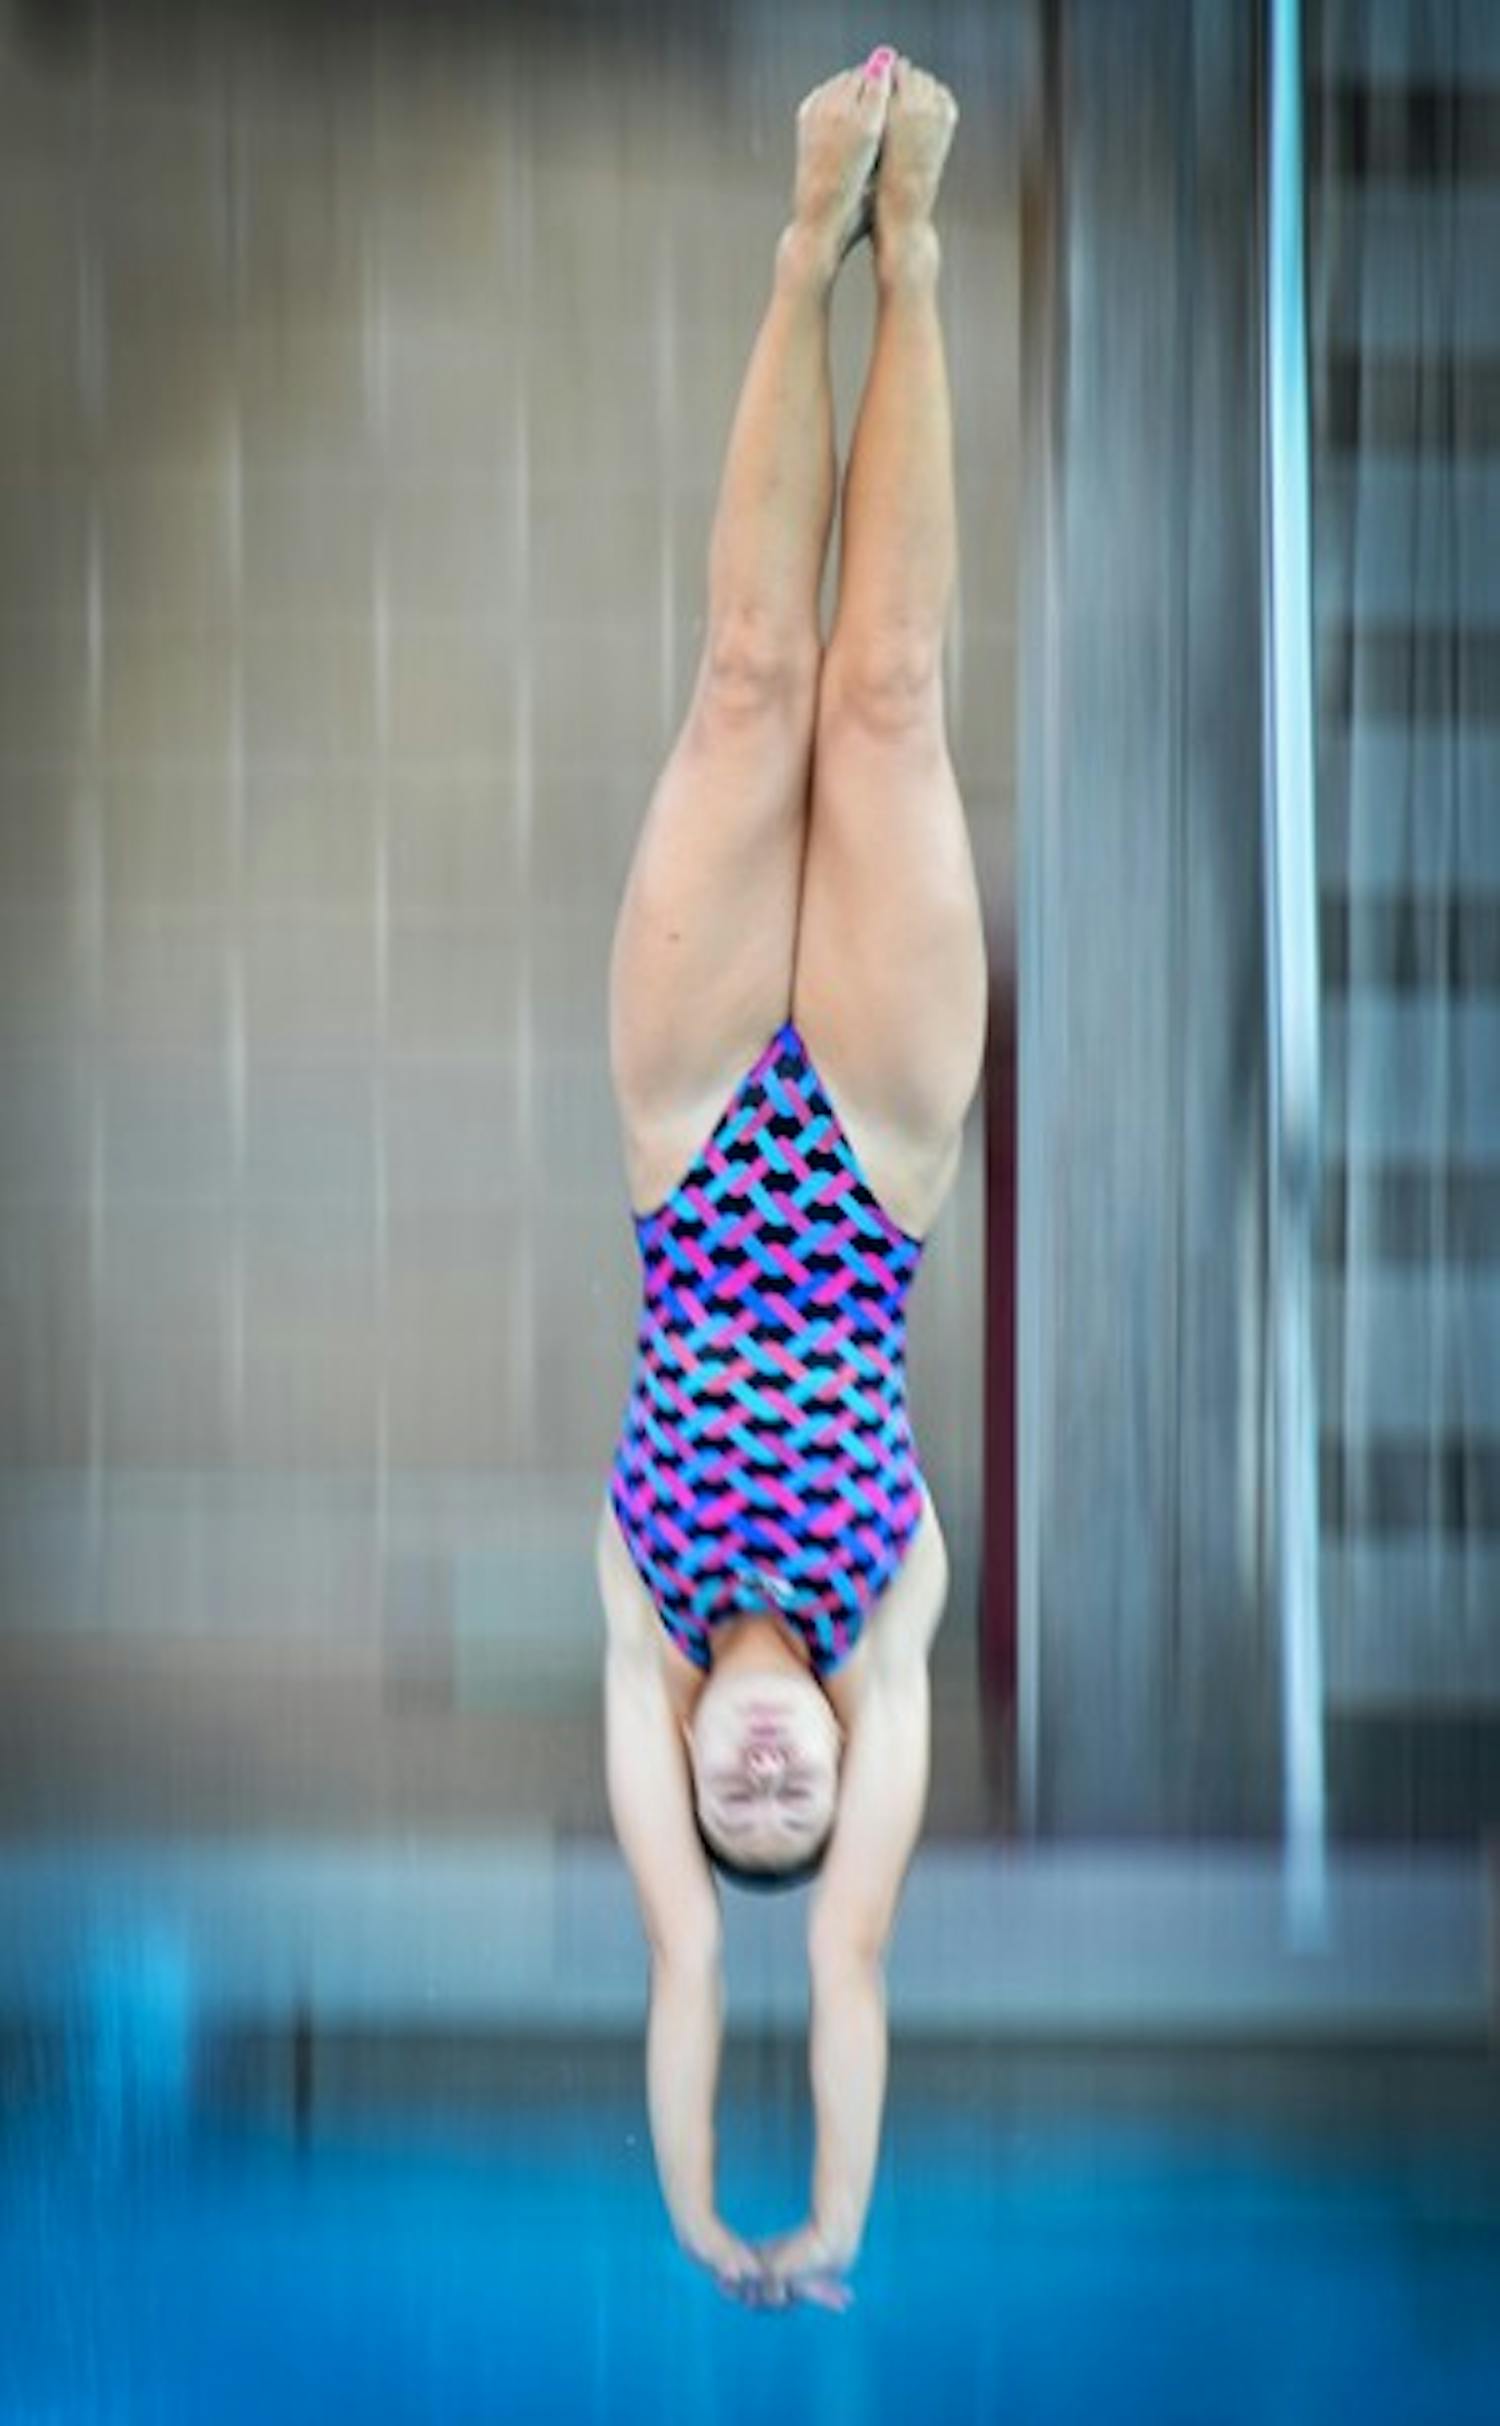 Hailey Casper dives in a practice November 2011. Casper is out for the remainder of the season with an injured shoulder. (Photo by Aaron Lavinsky)